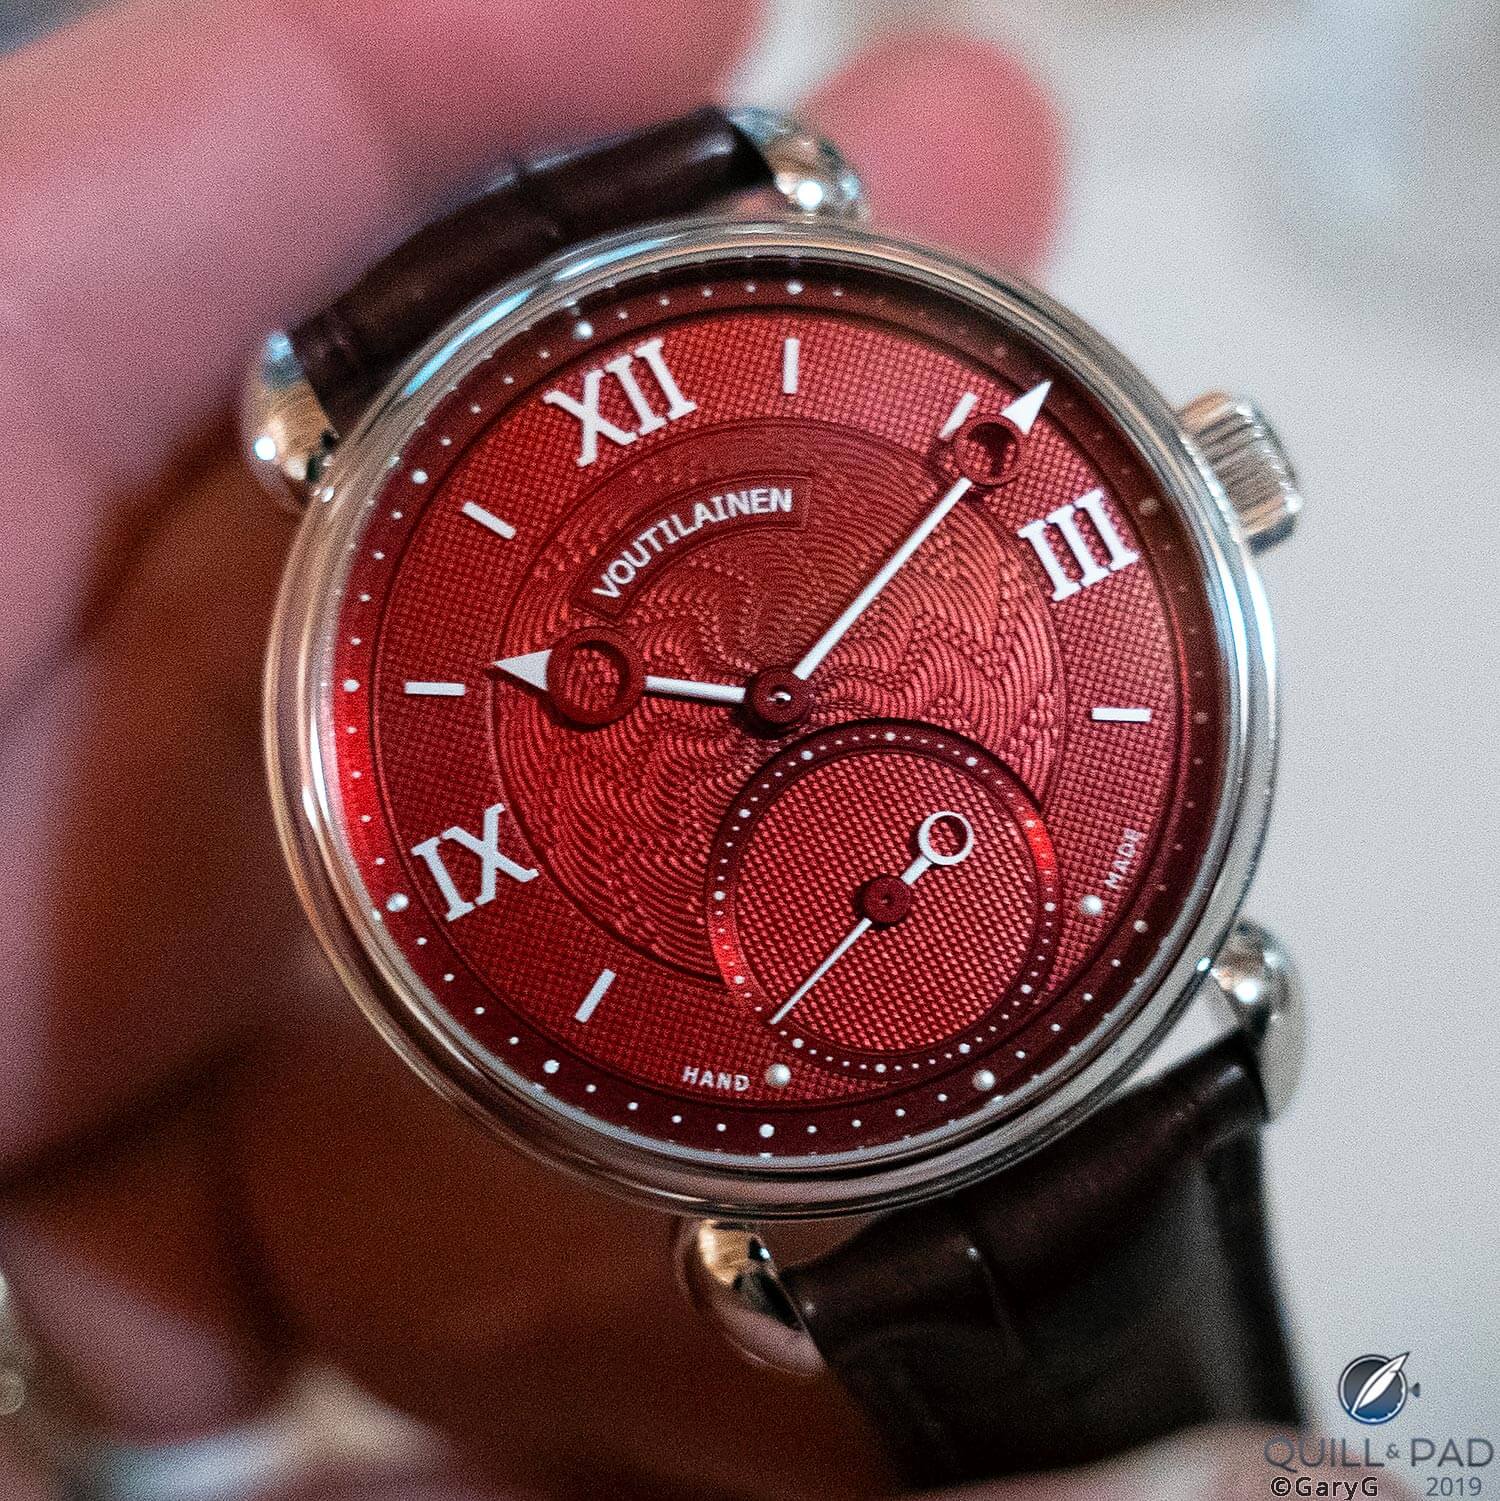 Vingt-8 in 37.5mm size with brilliant red guilloche dial from Kari Voutilainen